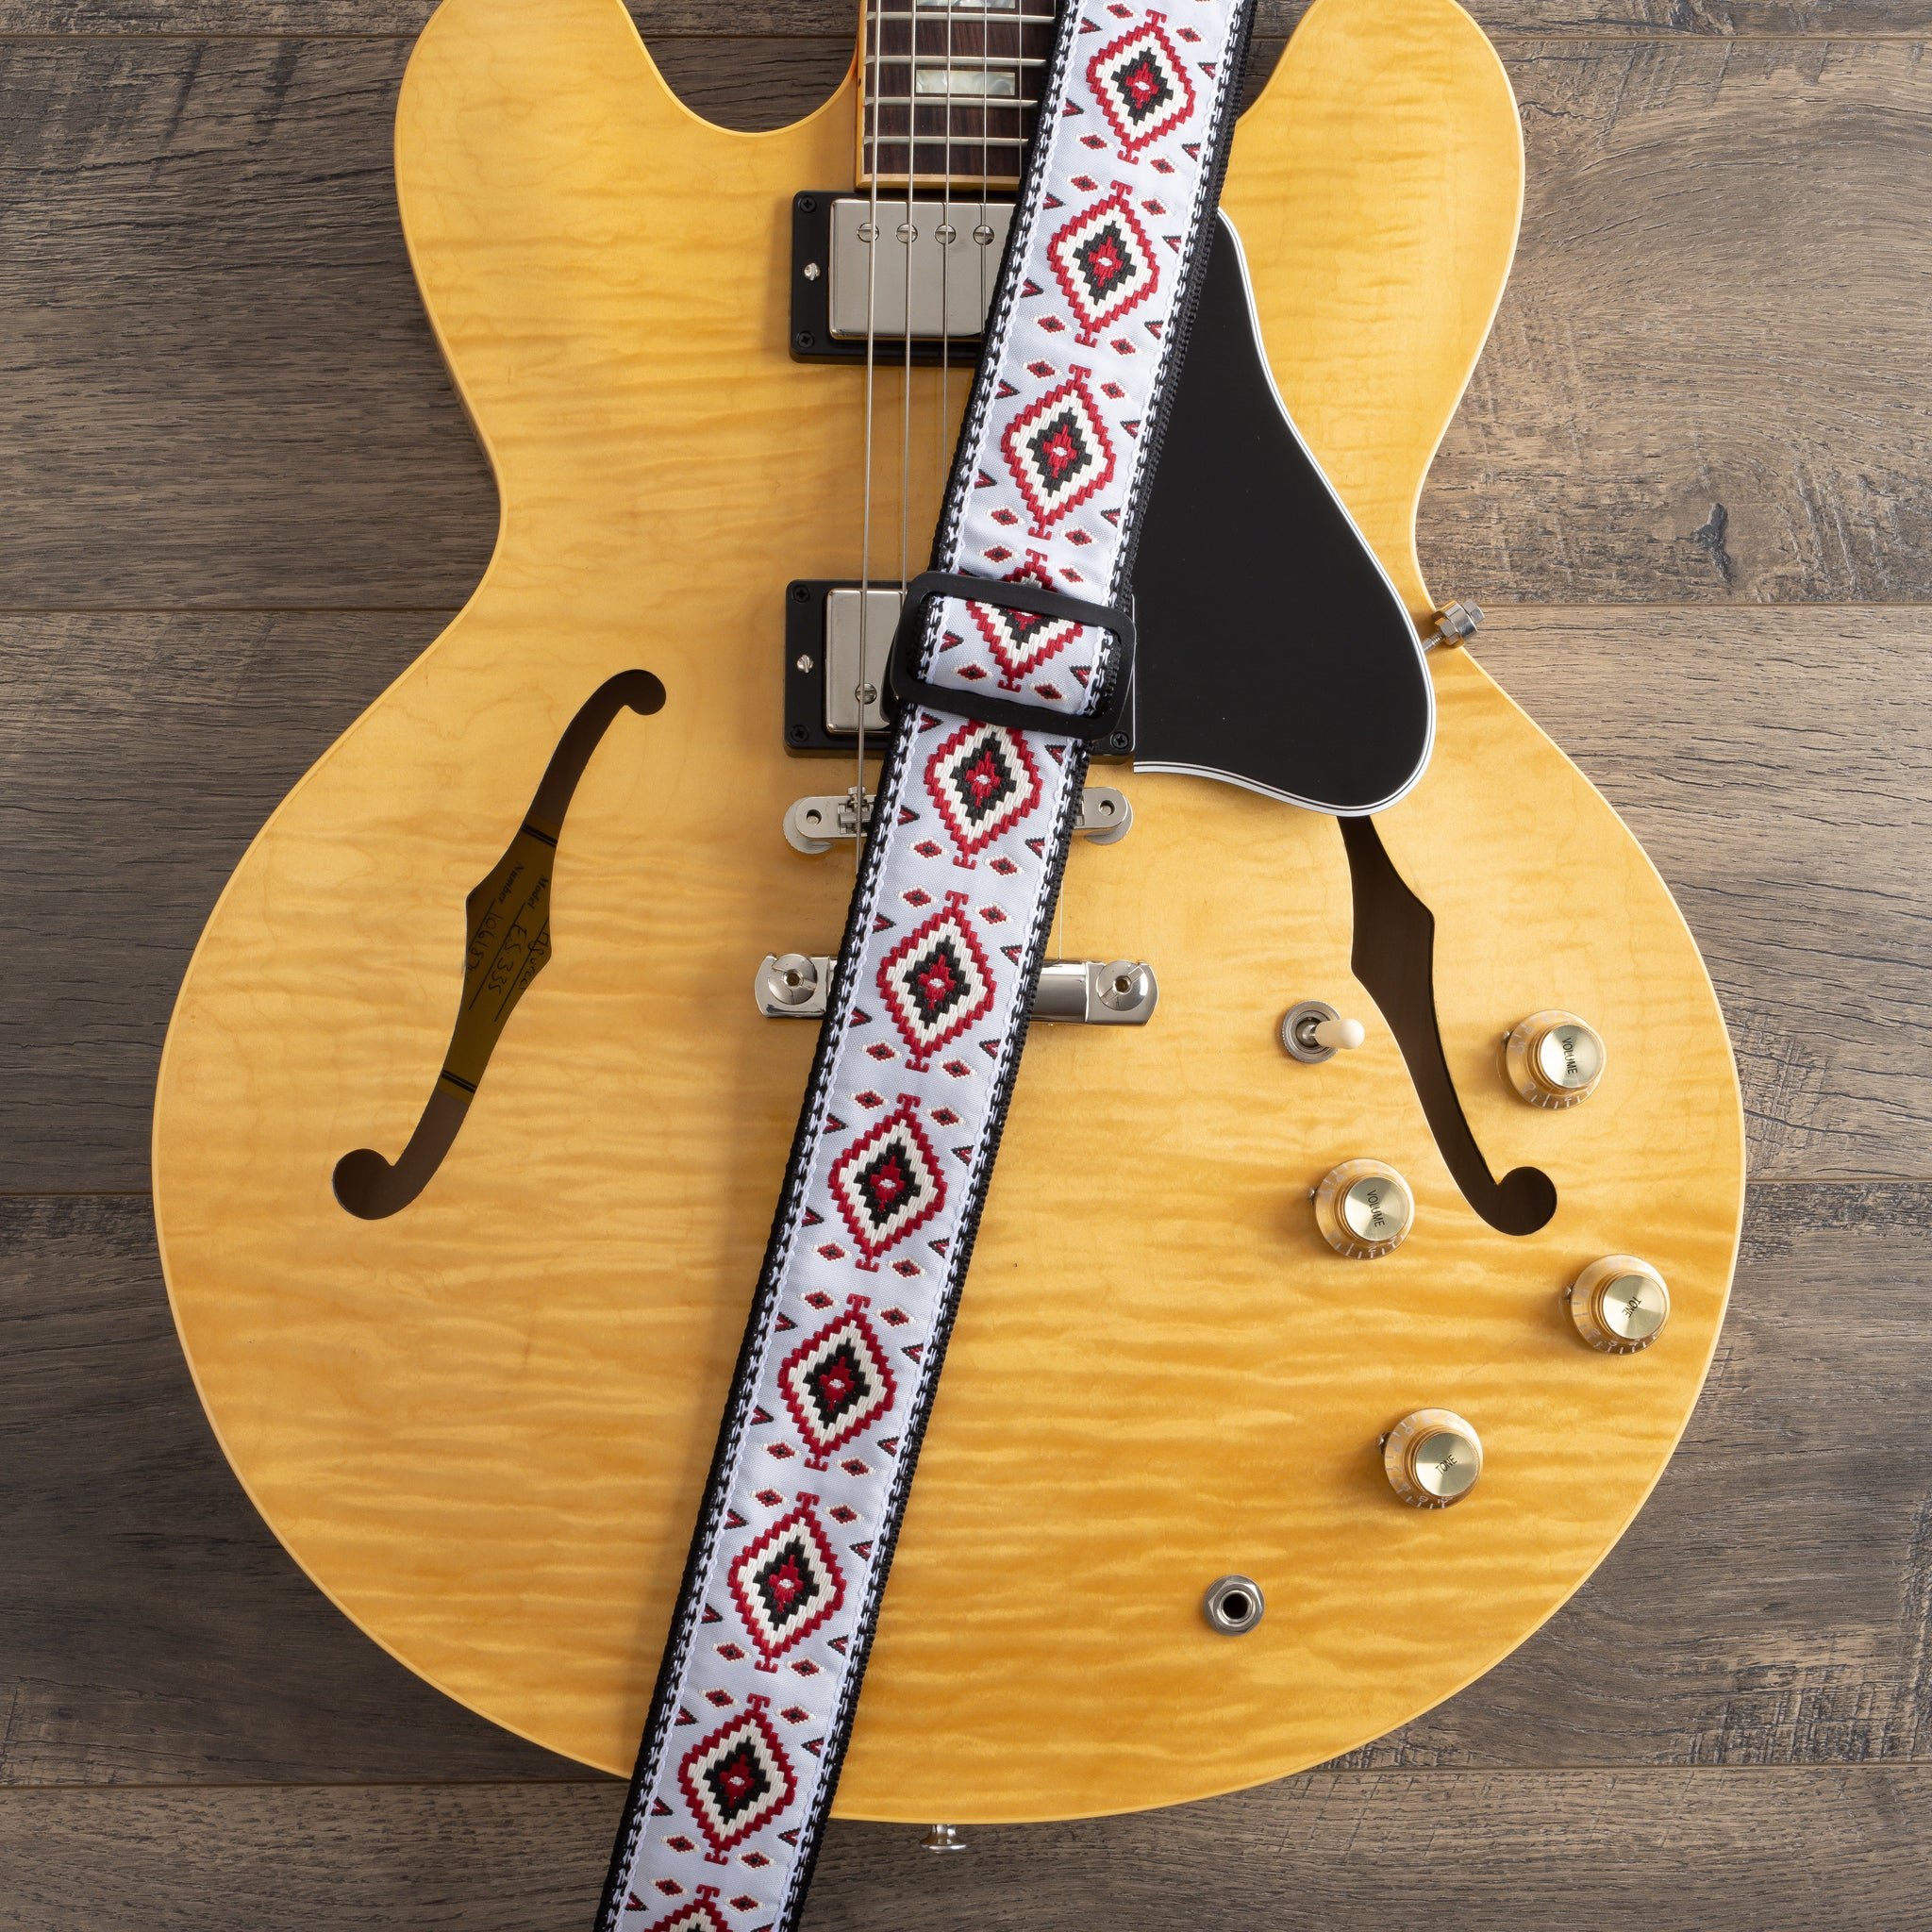  Hootenanny Guitar Strap For Acoustic Guitars , Electric Guitars  and Bass , Jacquard Weave Embroidered Adjustable Strap Includes 2 Strap  Locks To Keep Your Guitar Safe & 2 Unique Picks and